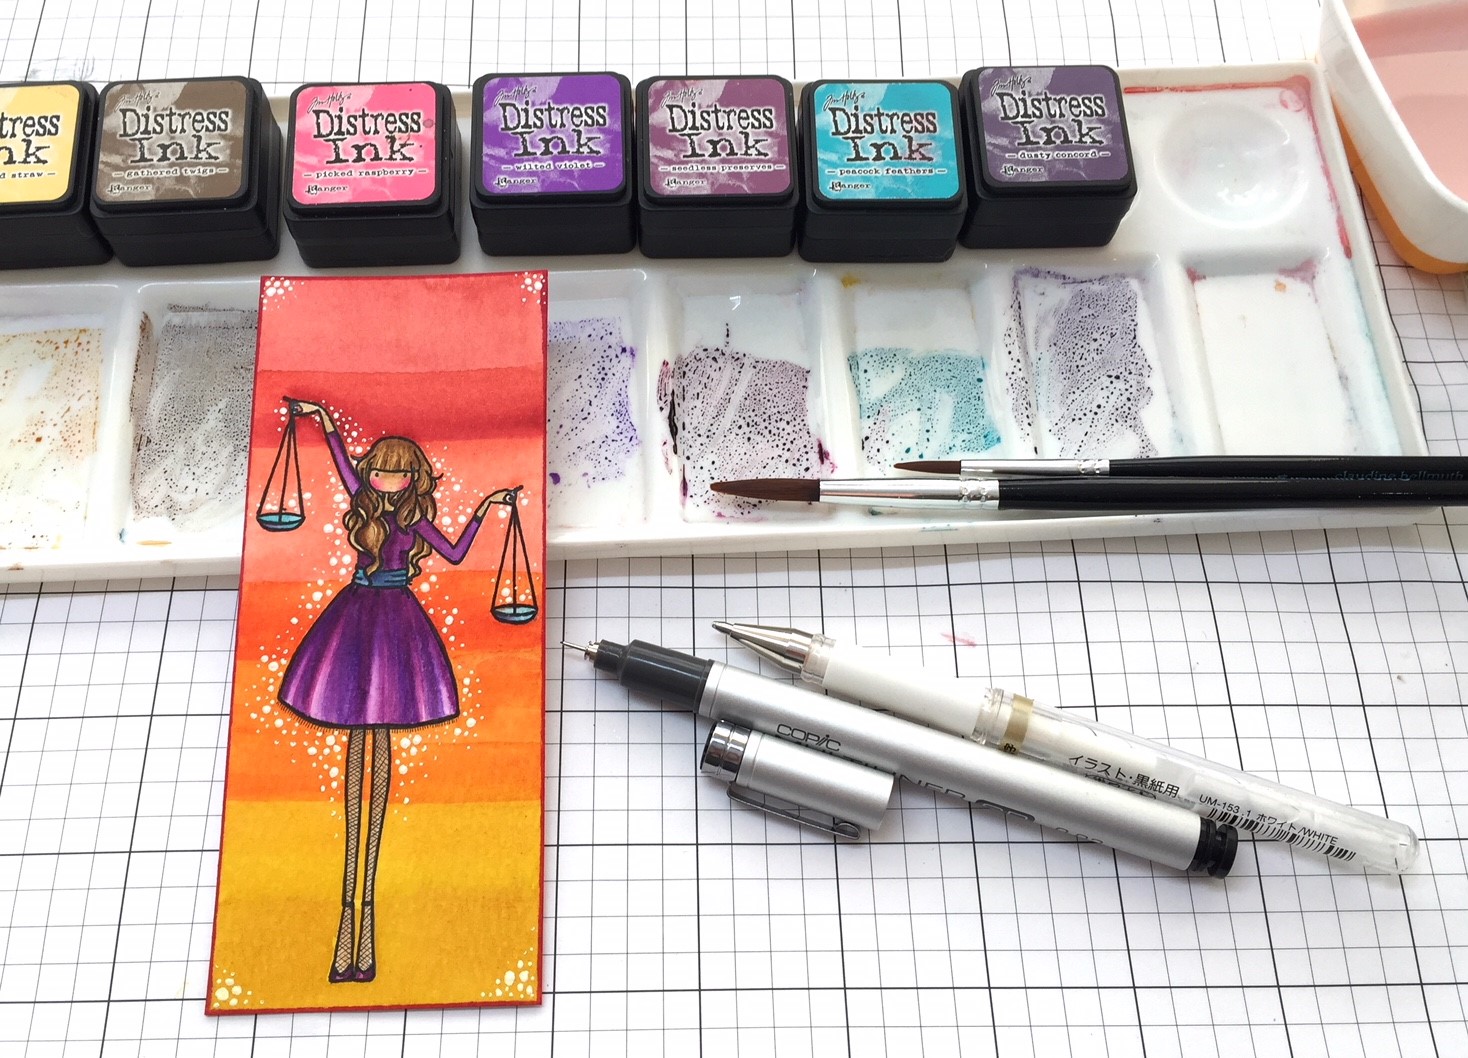 www.stampingbella.com: rubber stamp used: UPTOWN ZODIAC GIRL LIBRA card by KATHY RACOOSIN